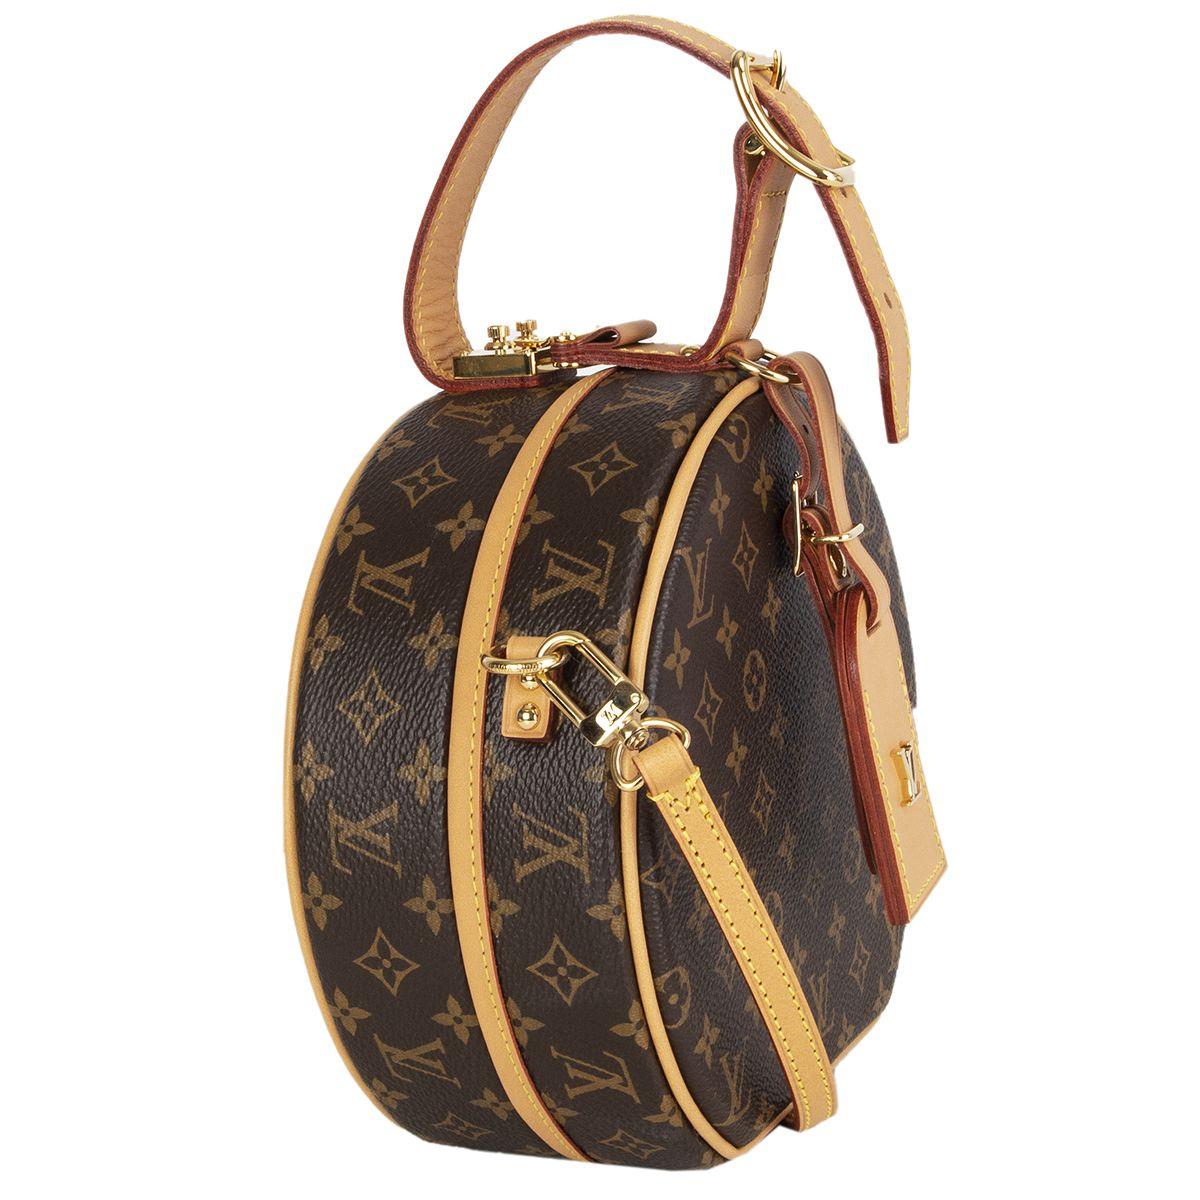 Louis Vuitton 'Petite Boîte Chapeau' iconic hatbox is reimagined as an adorable day-to-evening bag. Small yet practical, this exclusive piece comes in classic coated Monogram canvas with cowhide trim. Lined in cream lambskin with one open pocket